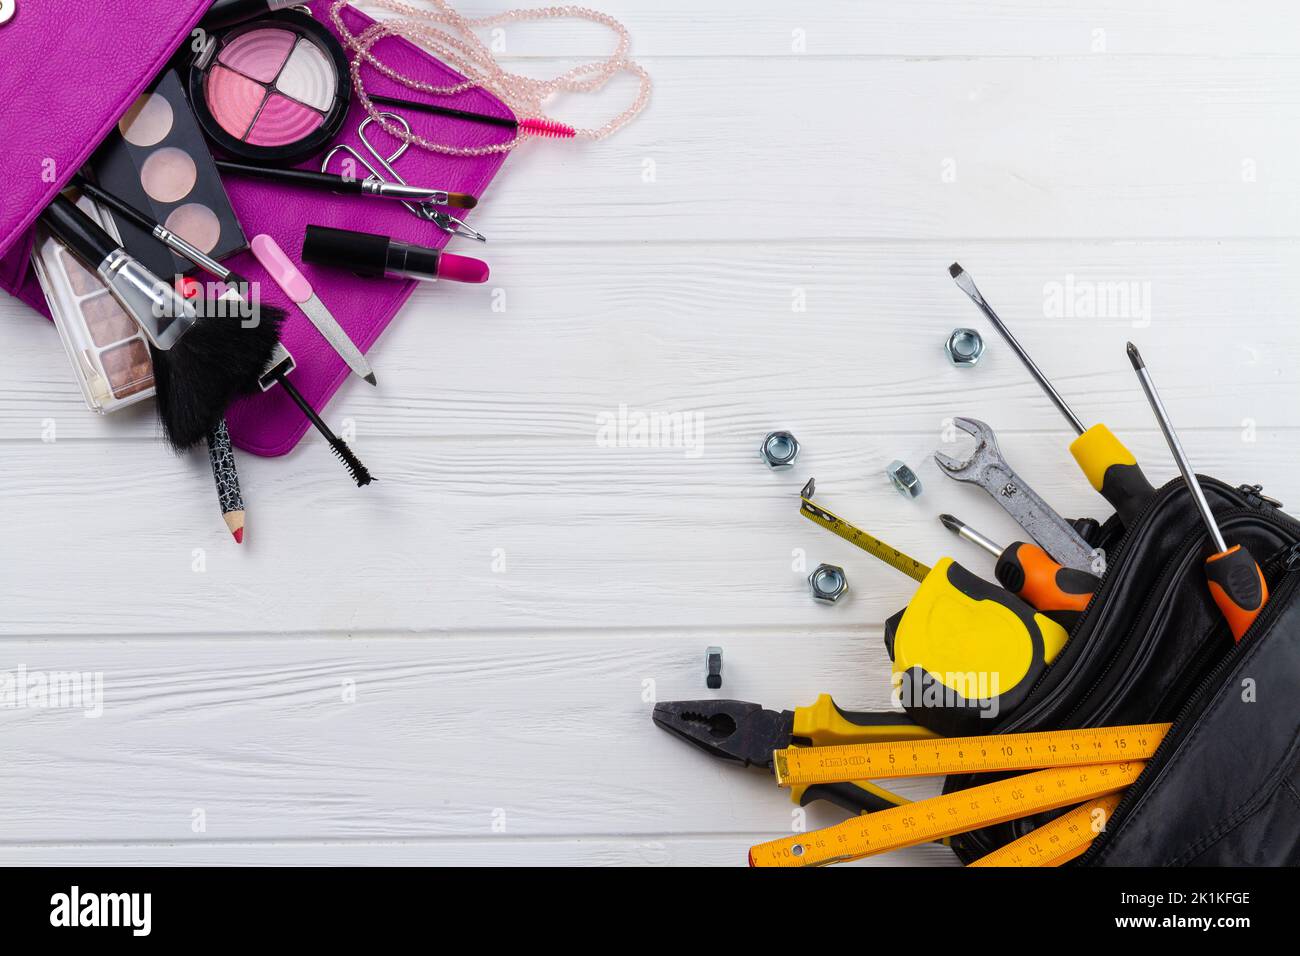 Flat lay repair tools and make-up accessories. Concept of man versus woman. Space for text on white wooden desk. Stock Photo